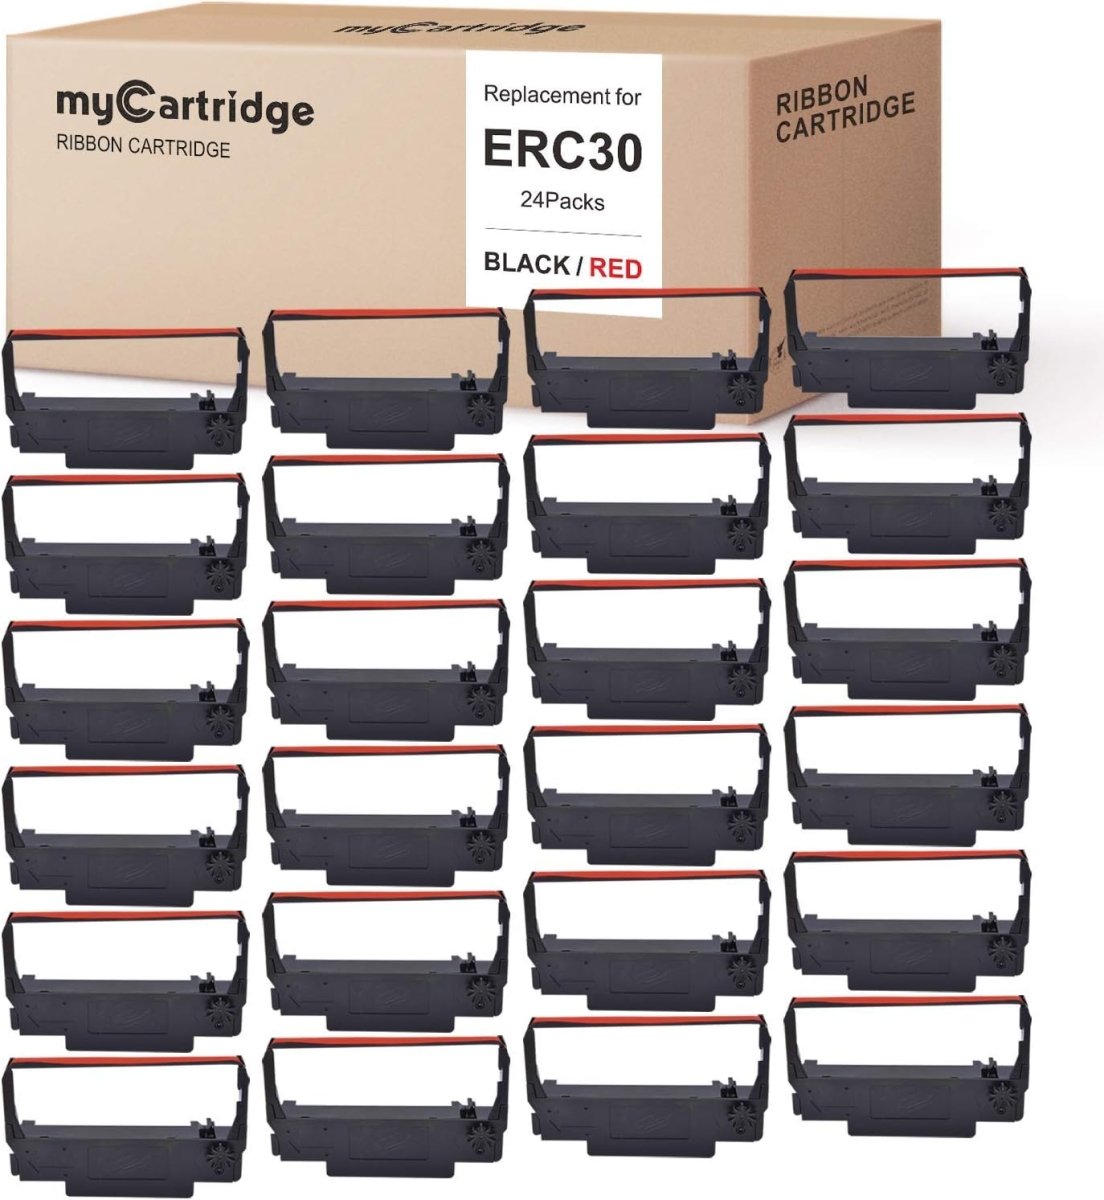 Erc 30 erc 30 34 38 br ribbon cartridge for use in erc38 nk506 black red 24 pack